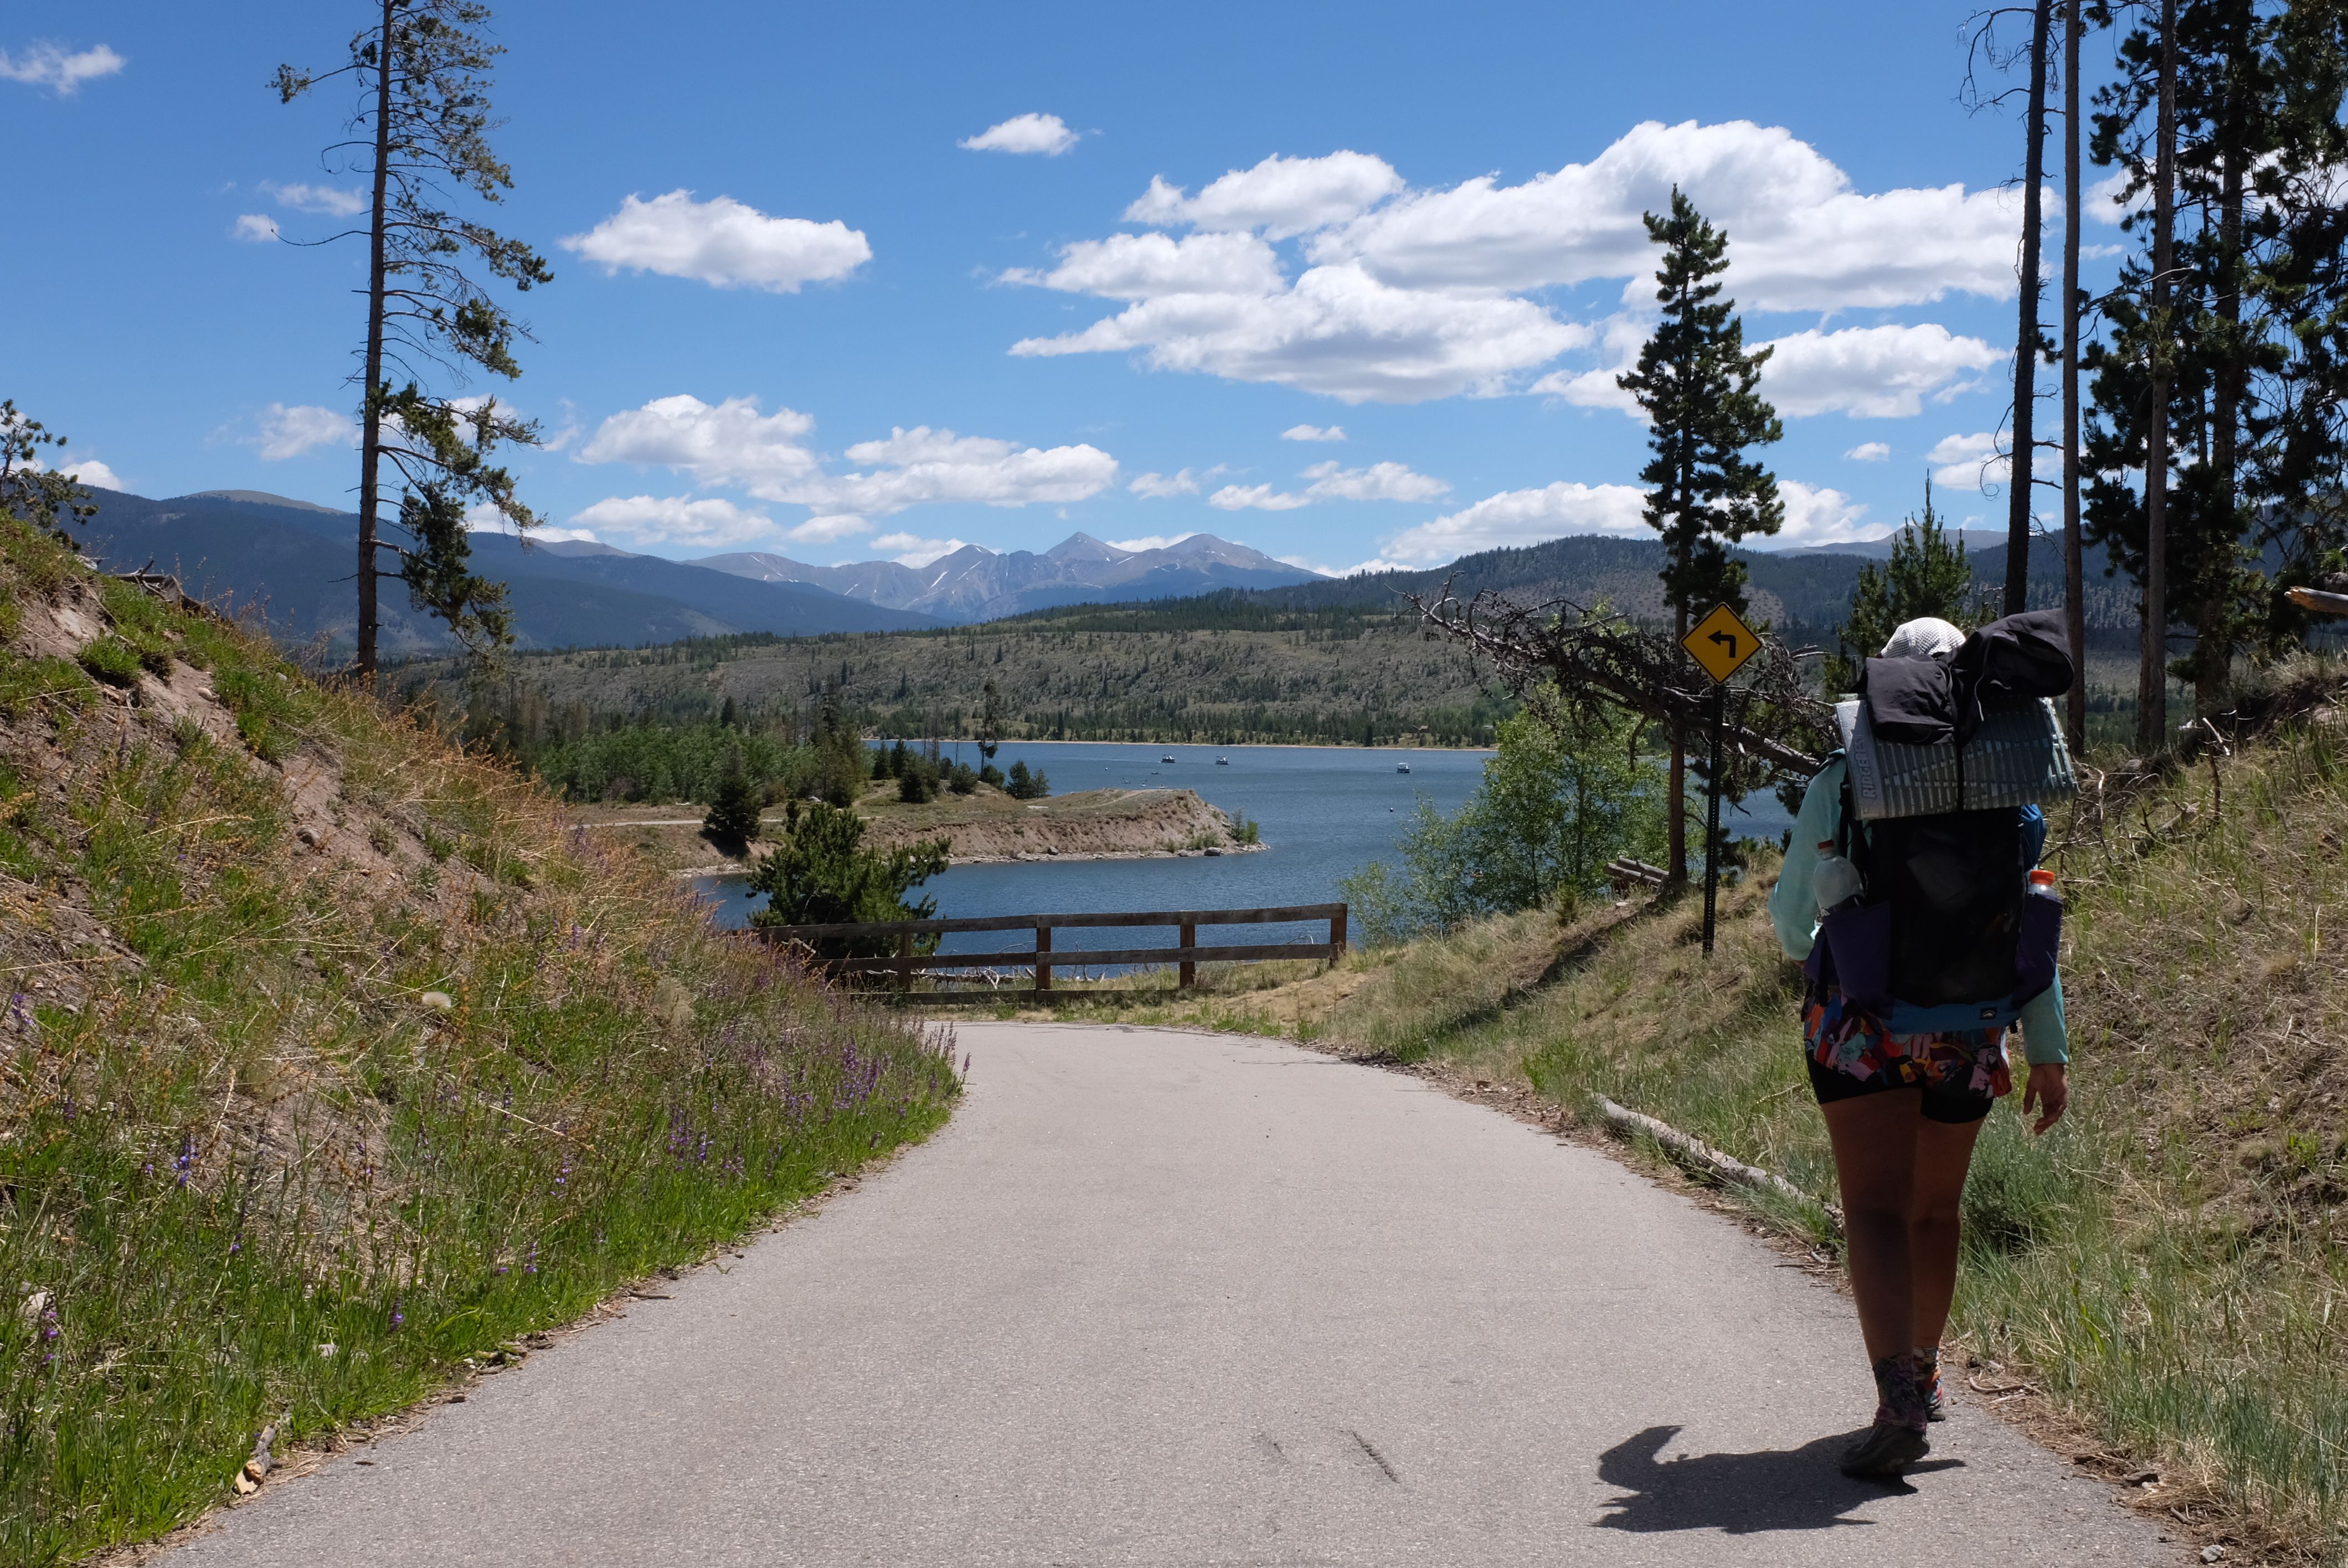 Walking the bike path between Copper Mountain and Dillon